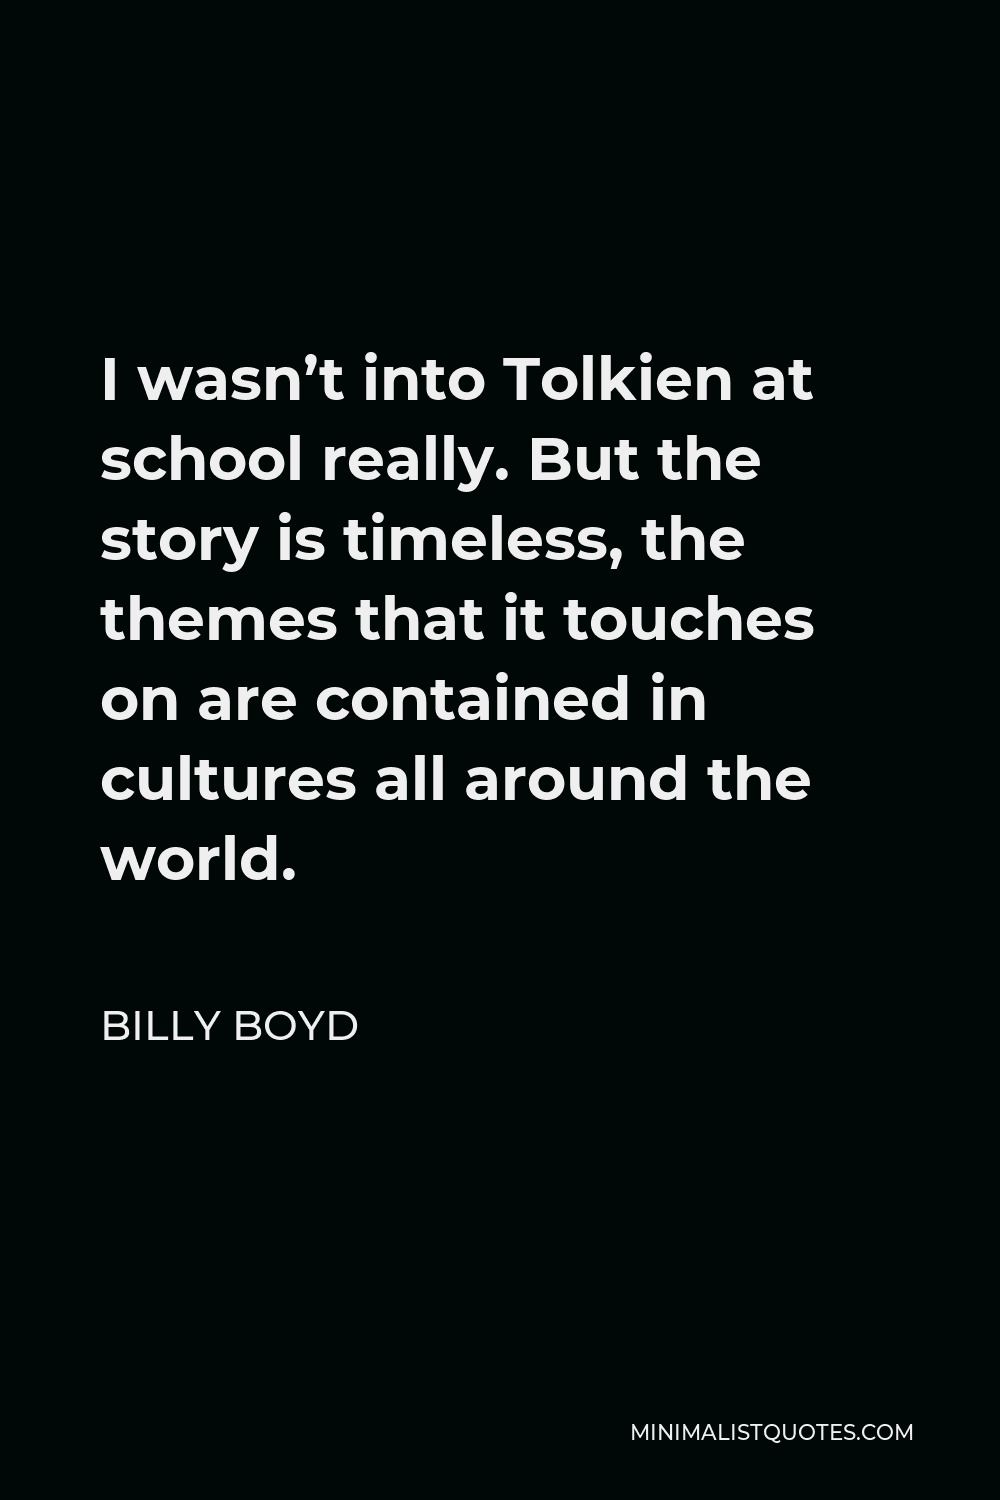 Billy Boyd Quote - I wasn’t into Tolkien at school really. But the story is timeless, the themes that it touches on are contained in cultures all around the world.